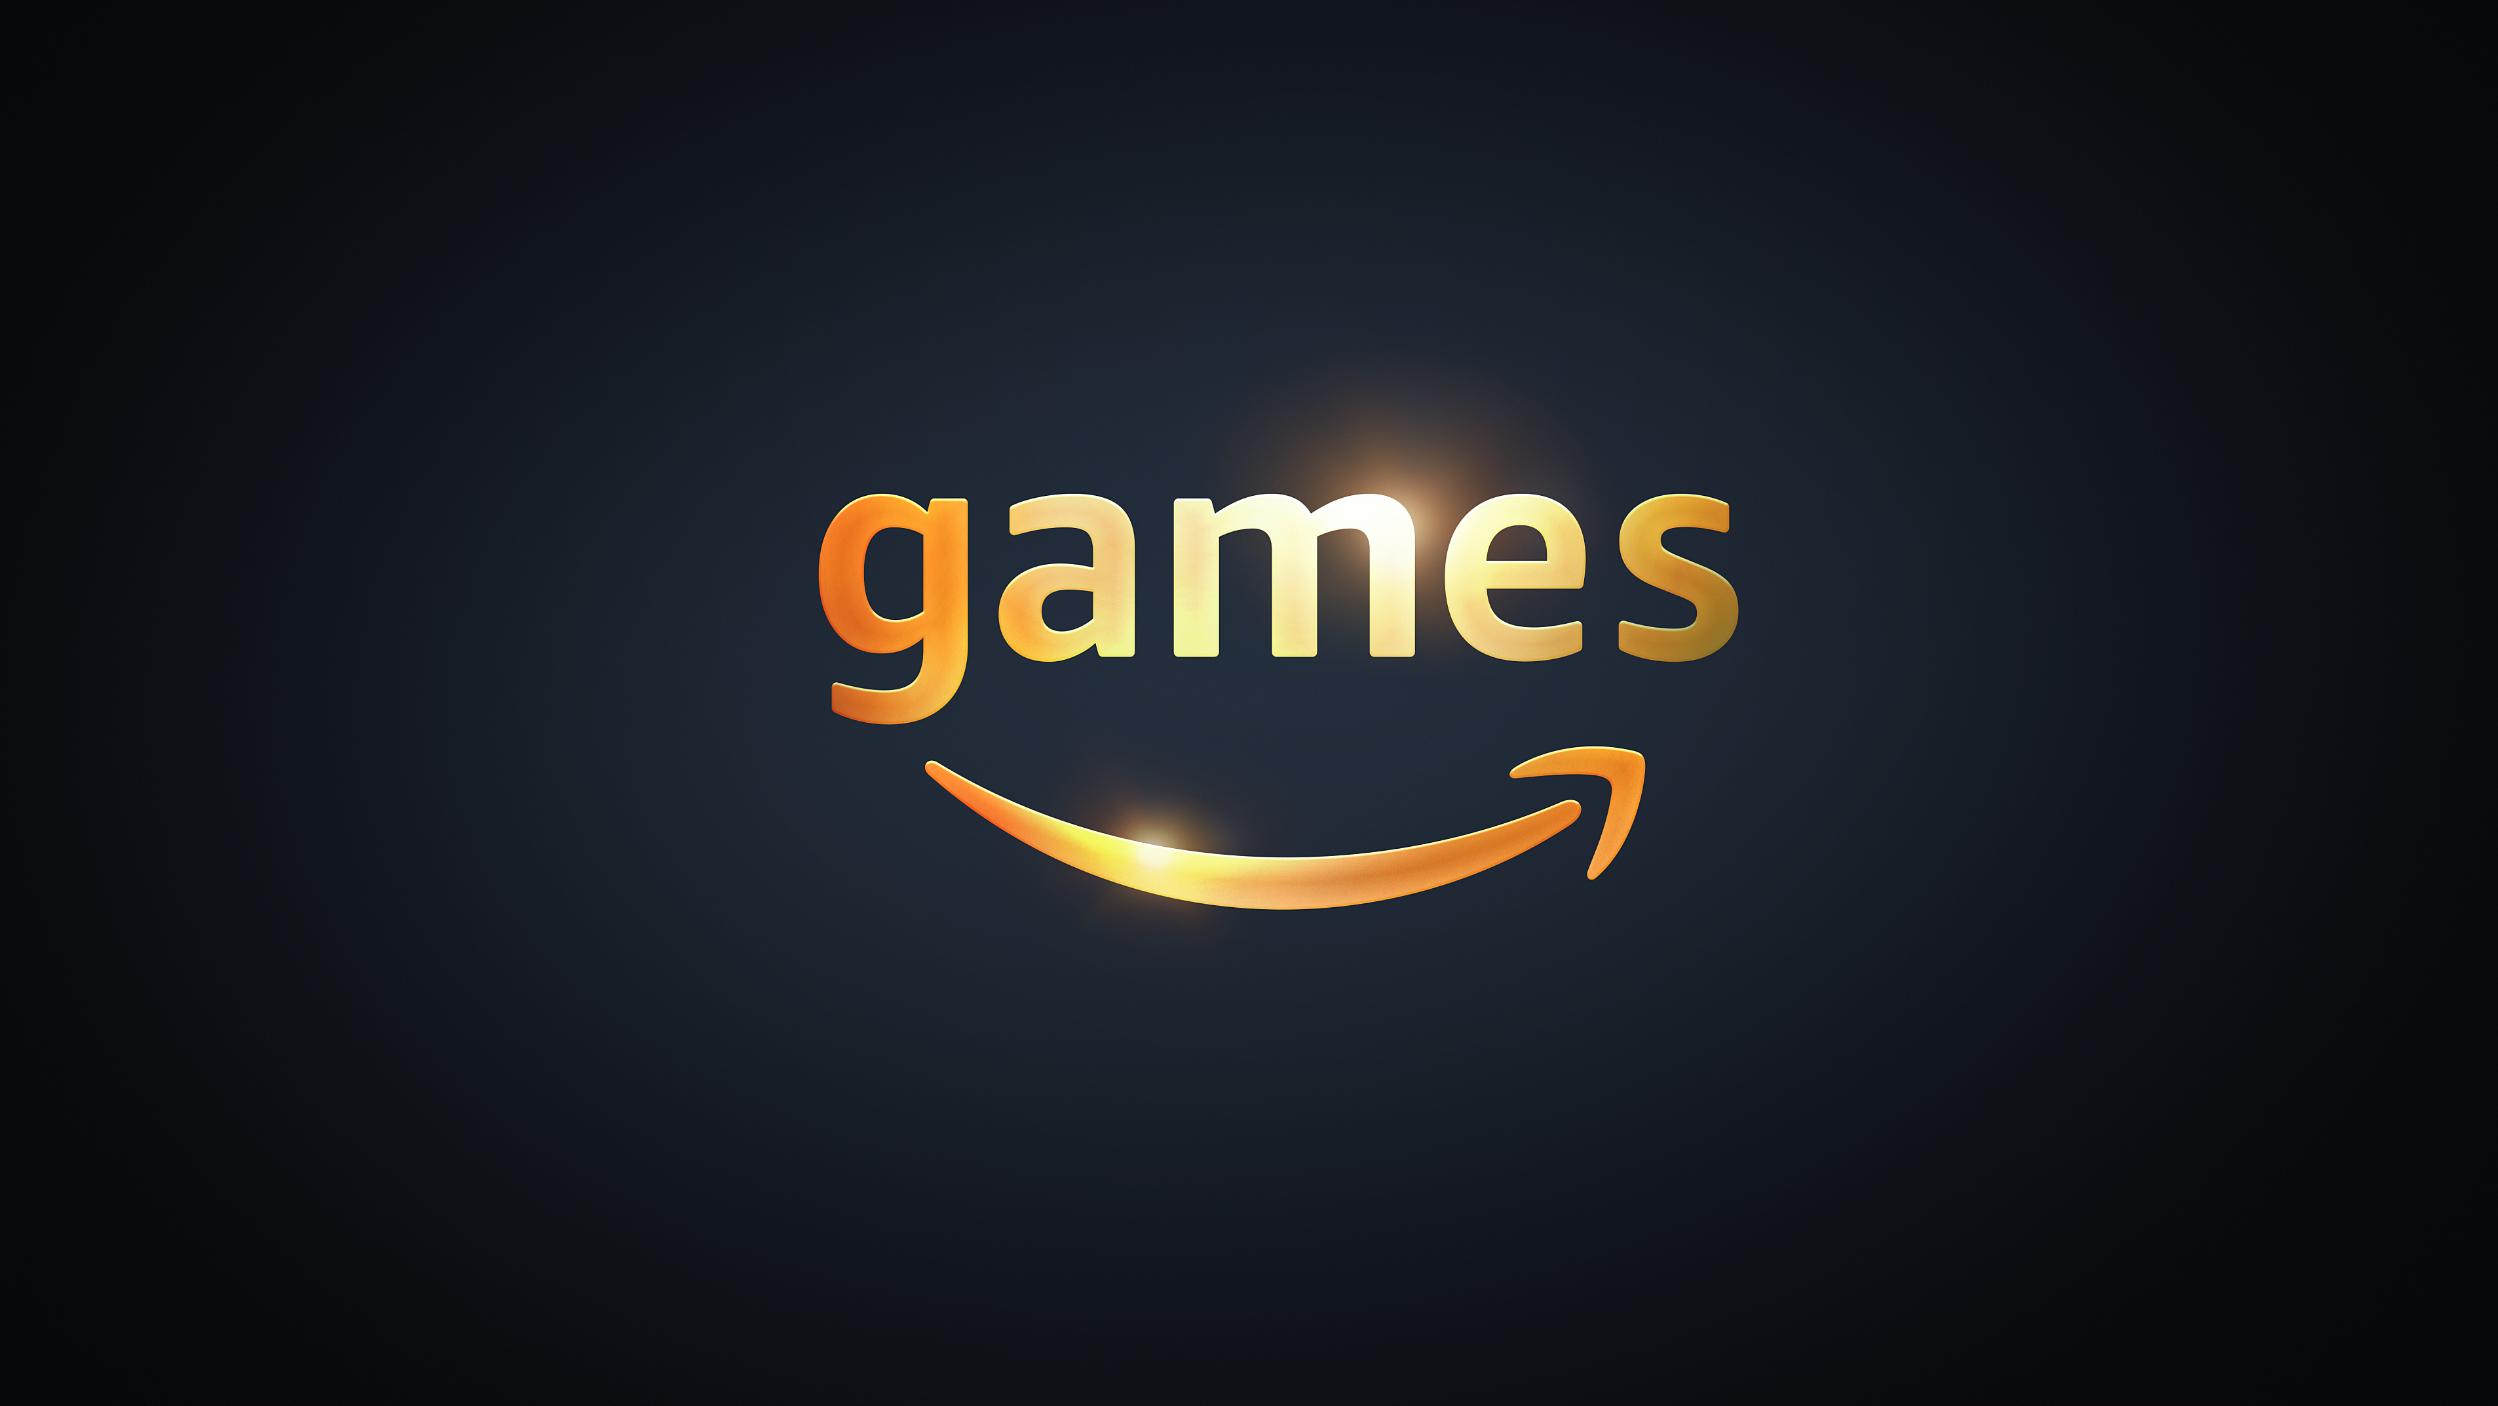 Why does Amazon make games?